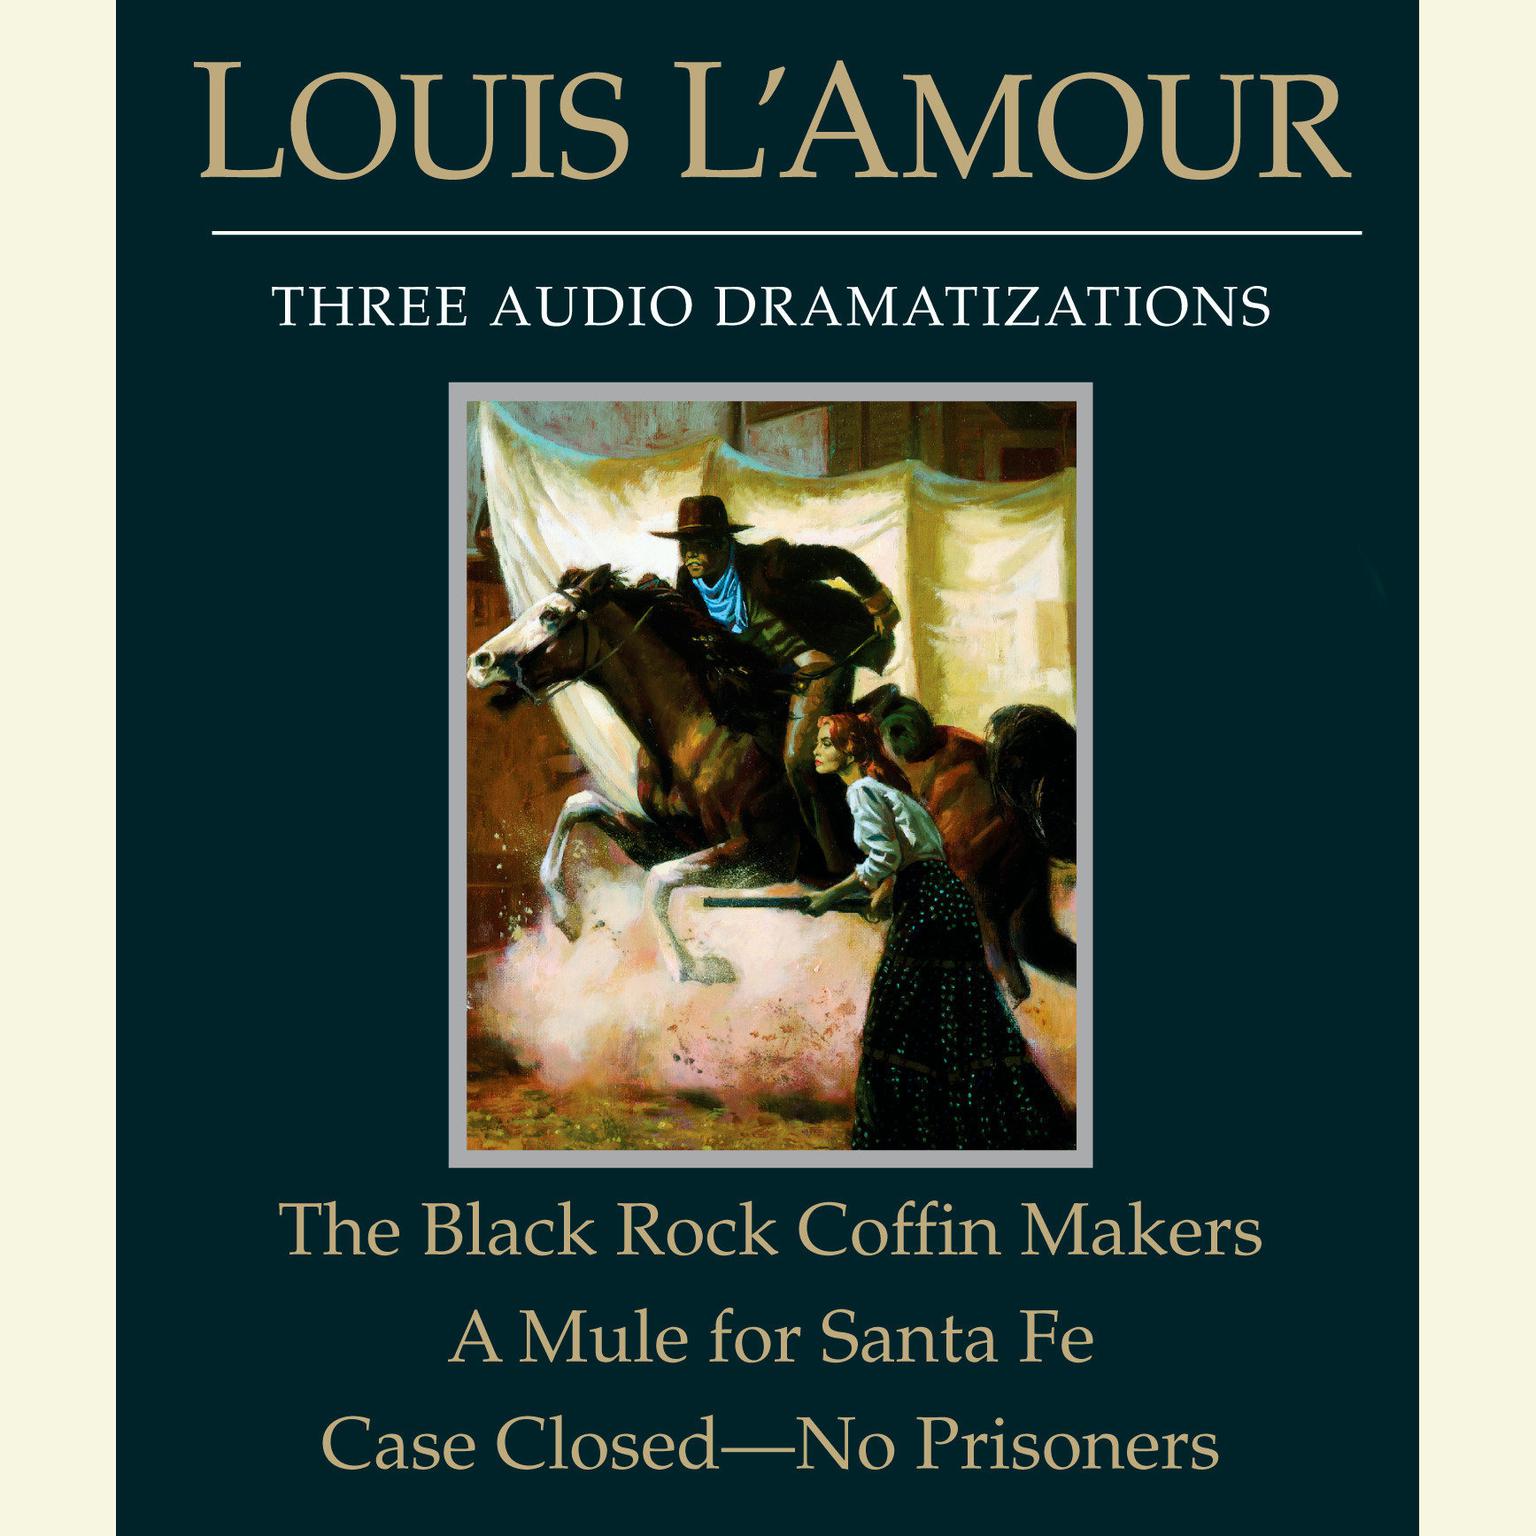 The Black Rock Coffin Makers/A Mule for Santa Fe/Case Closed - No Prisoners Audiobook, by Louis L’Amour